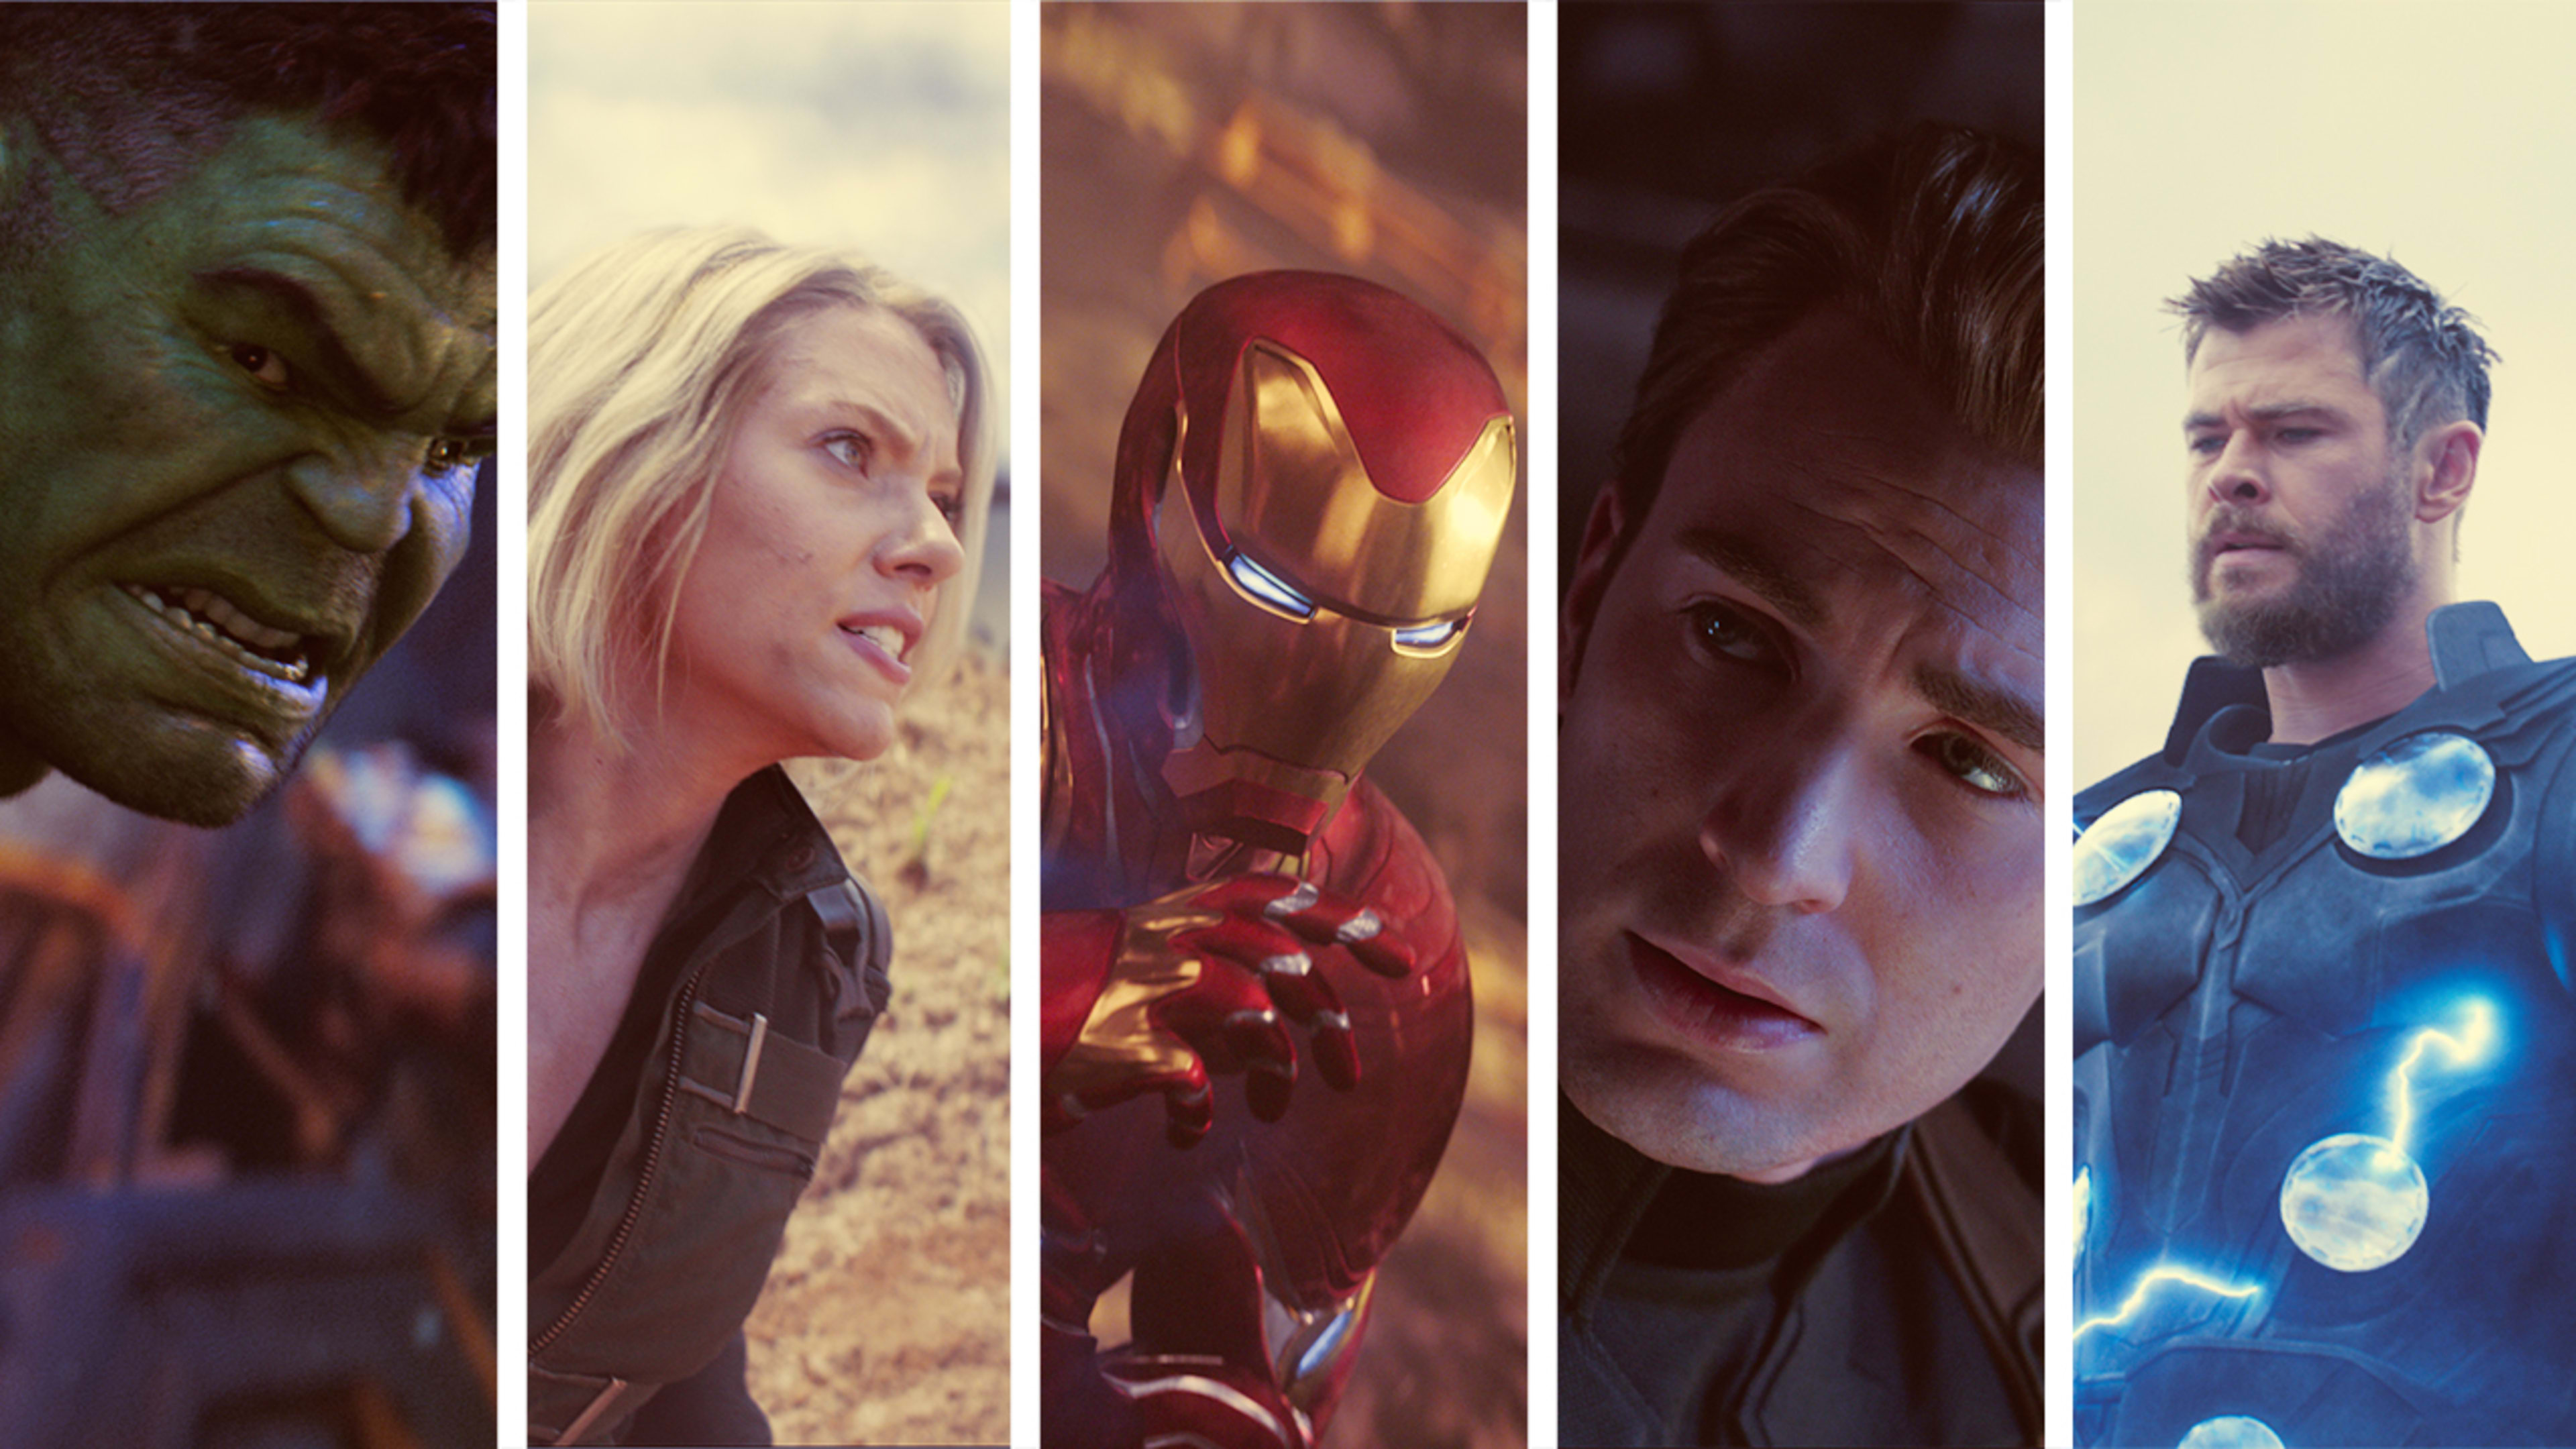 5 Things casual Marvel fans should know before “Avengers: Endgame”